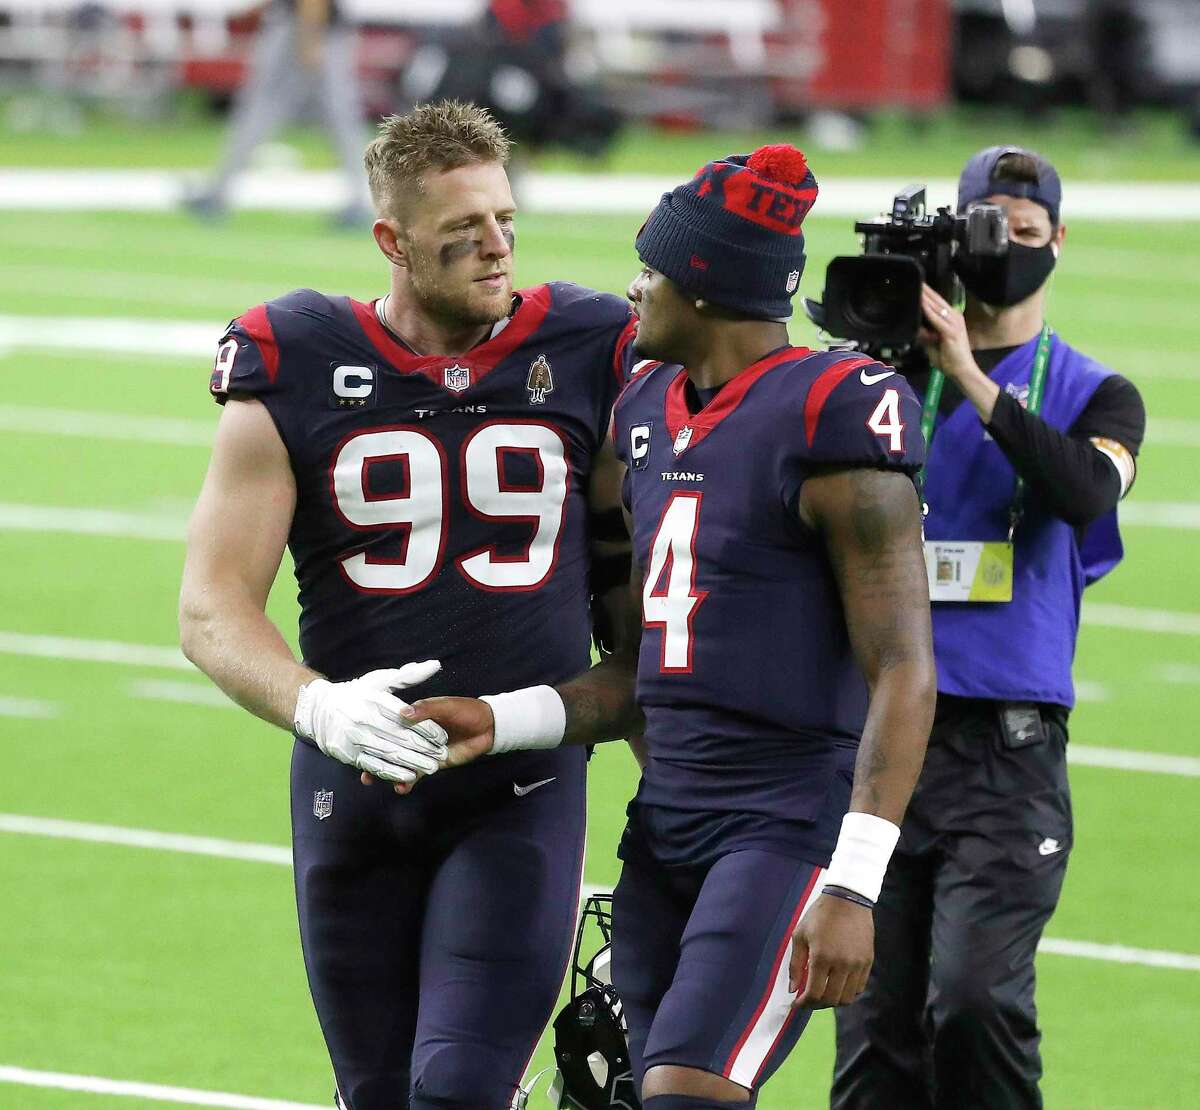 J.J. Watt is also leaving the Texans but his exit has been view differently than Deshaun Watson’s desire to be traded.